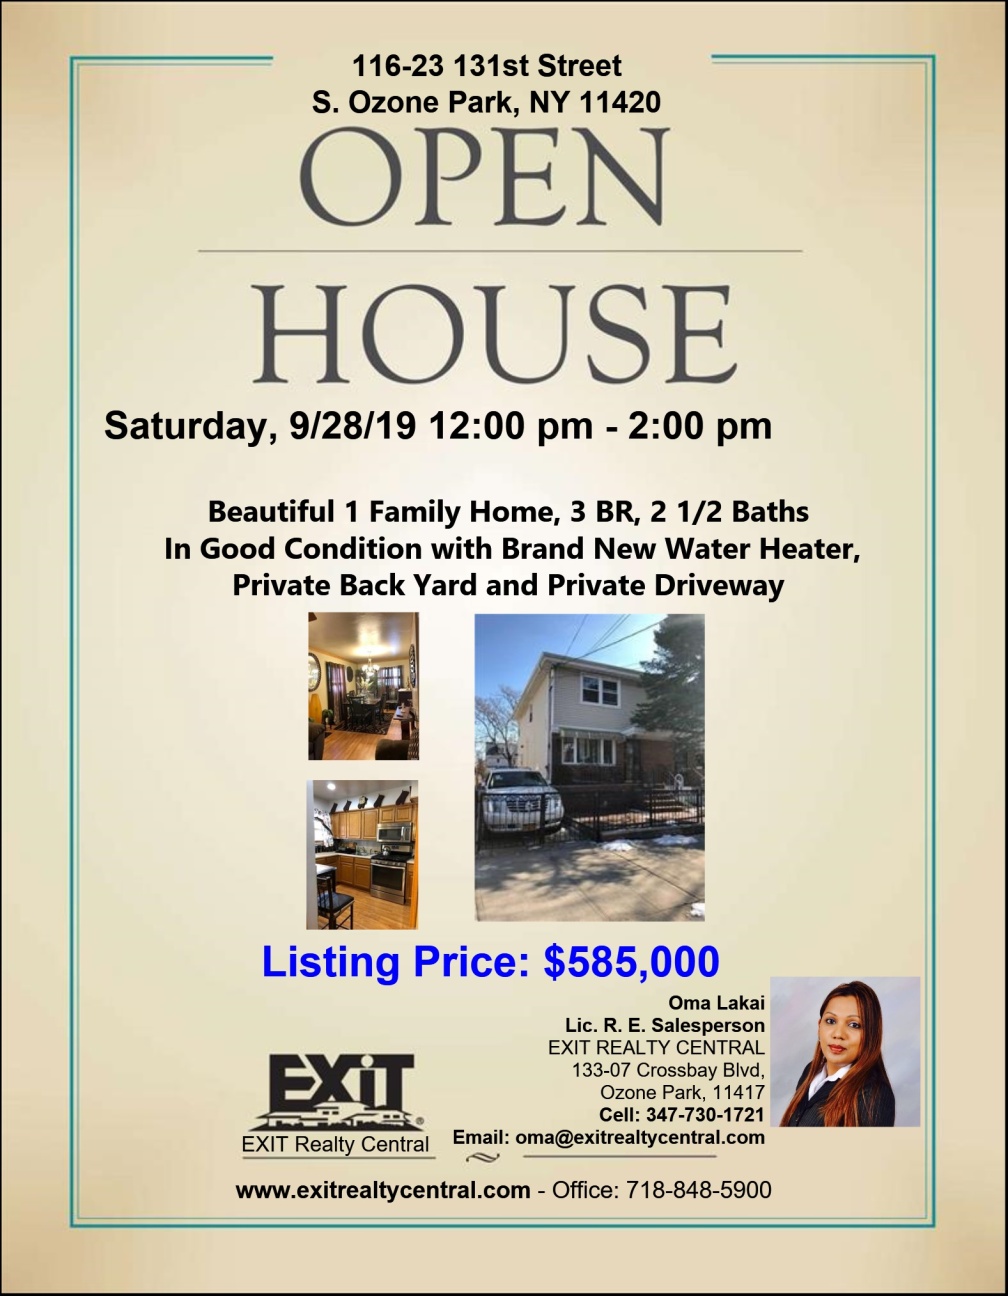 Open House in S. Ozone Park 9/28 12-2pm